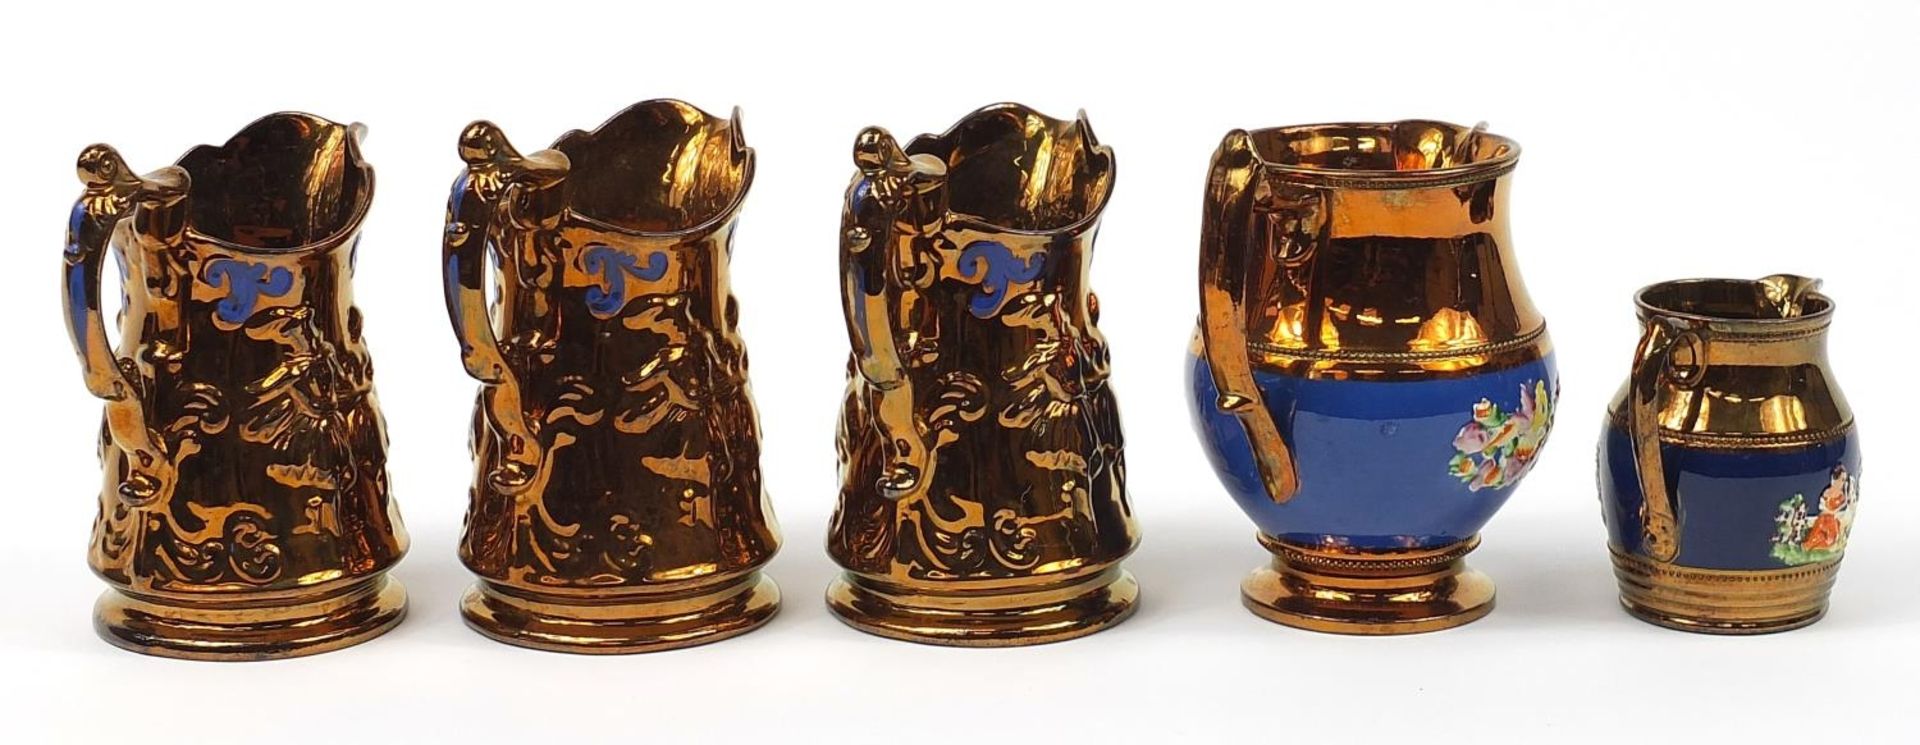 Five Victorian lustre jugs including one hand painted with flowers, the largest 19.5cm high - Image 4 of 5